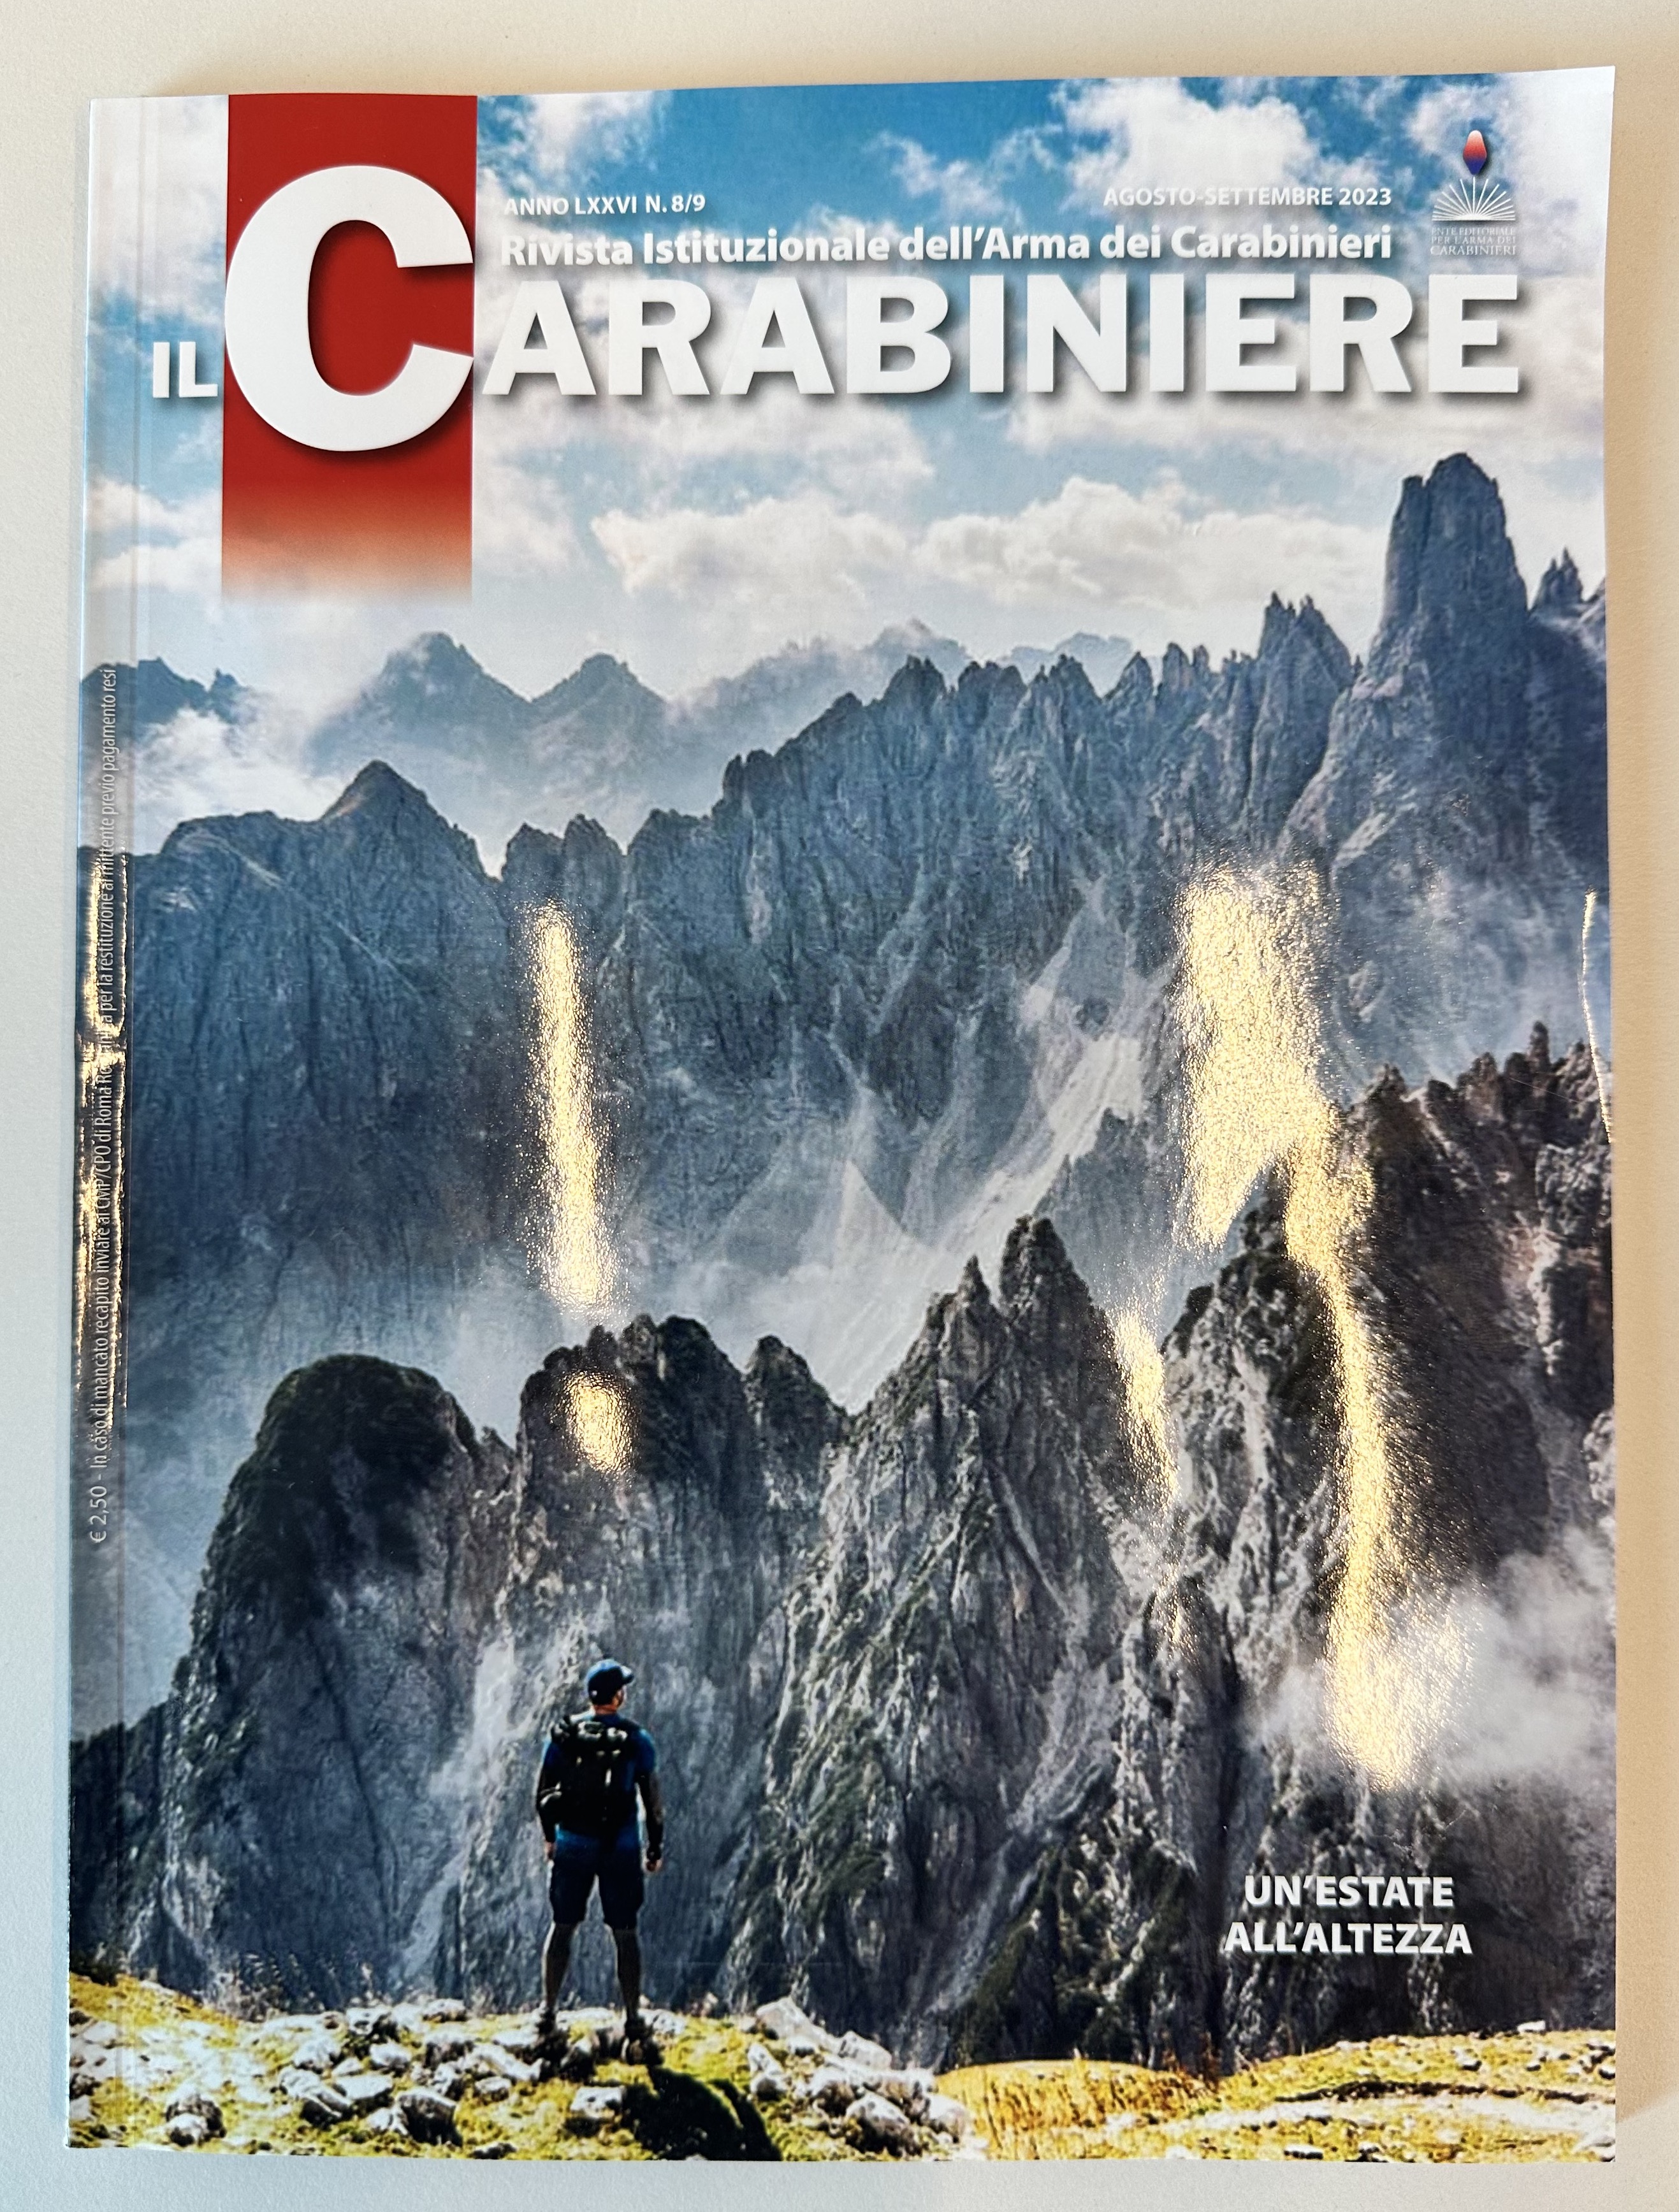 Great ethical company and partner: Carabinieri magazine publishes the August-September issue on Lubea 